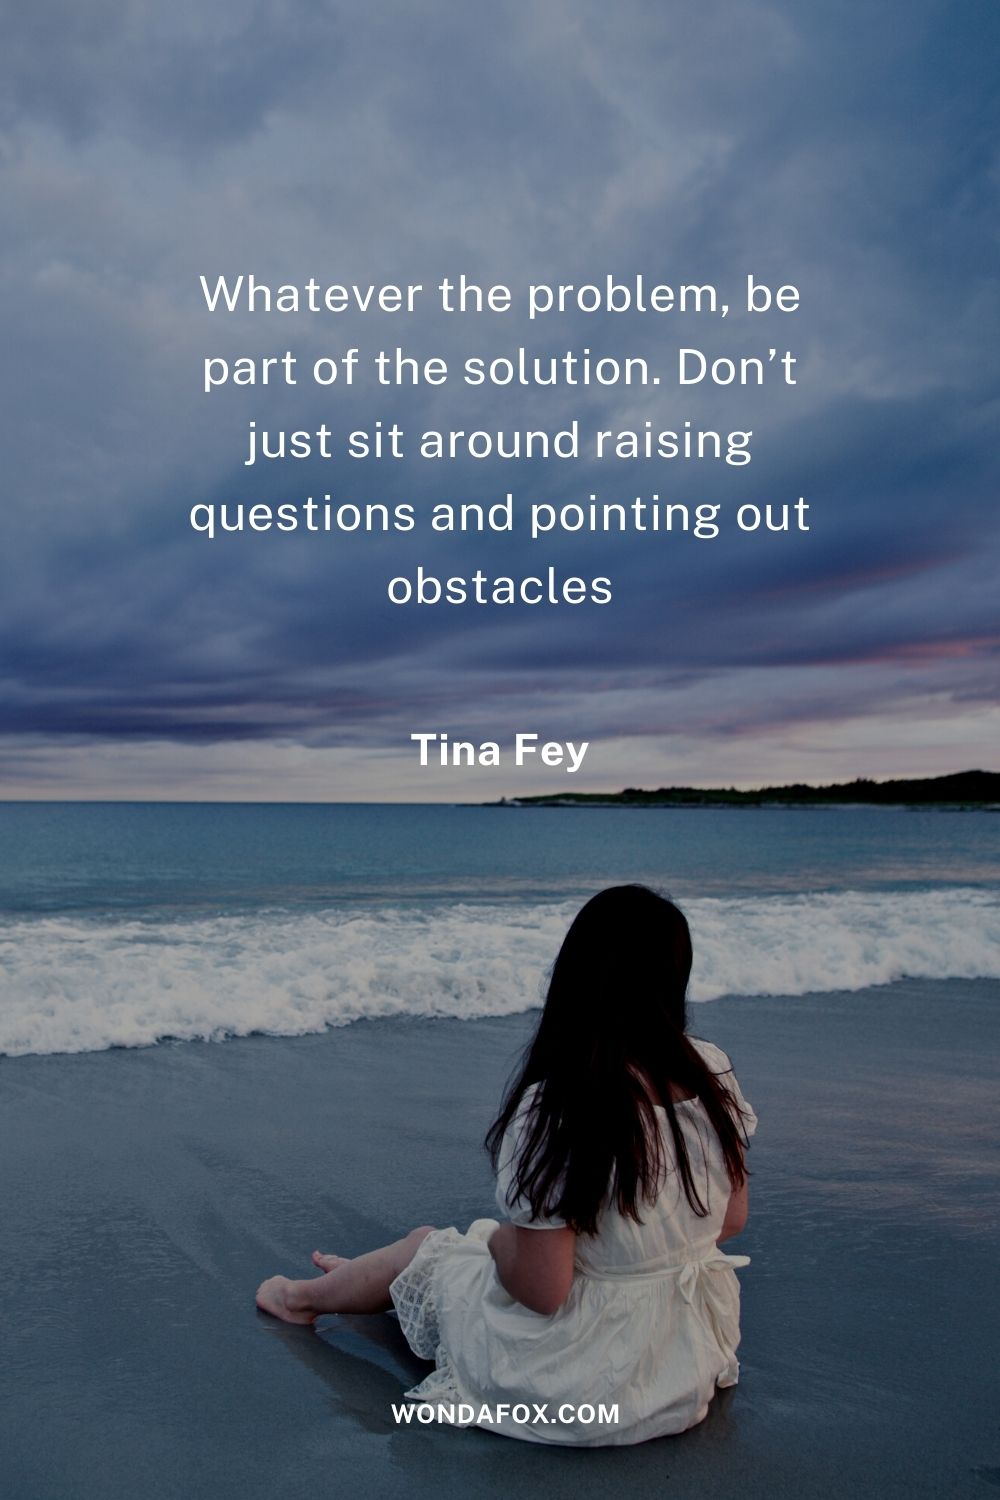 Whatever the problem, be part of the solution. Don’t just sit around raising questions and pointing out obstacles